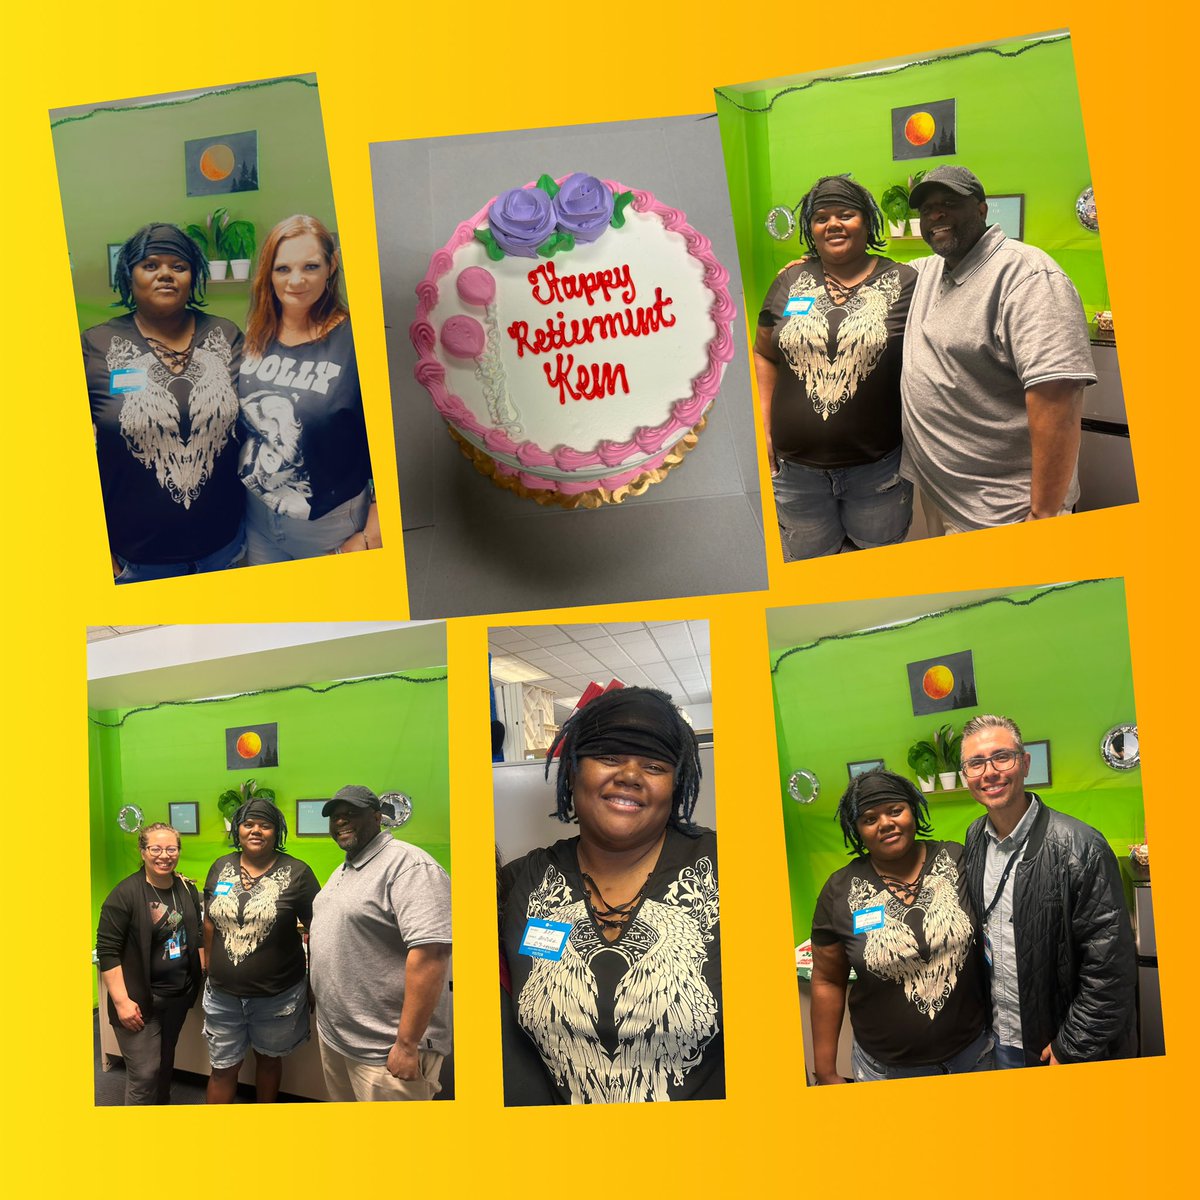 it was a day of mixed  emotions as we congratulated Kem Allen Dawson last Friday . She celebrated her 50th birthday , announced her retirement after working 28 years  & Shes determined to find her happiness!  #gwr  #lifeatatt @DanaColemanWil1 @ATT